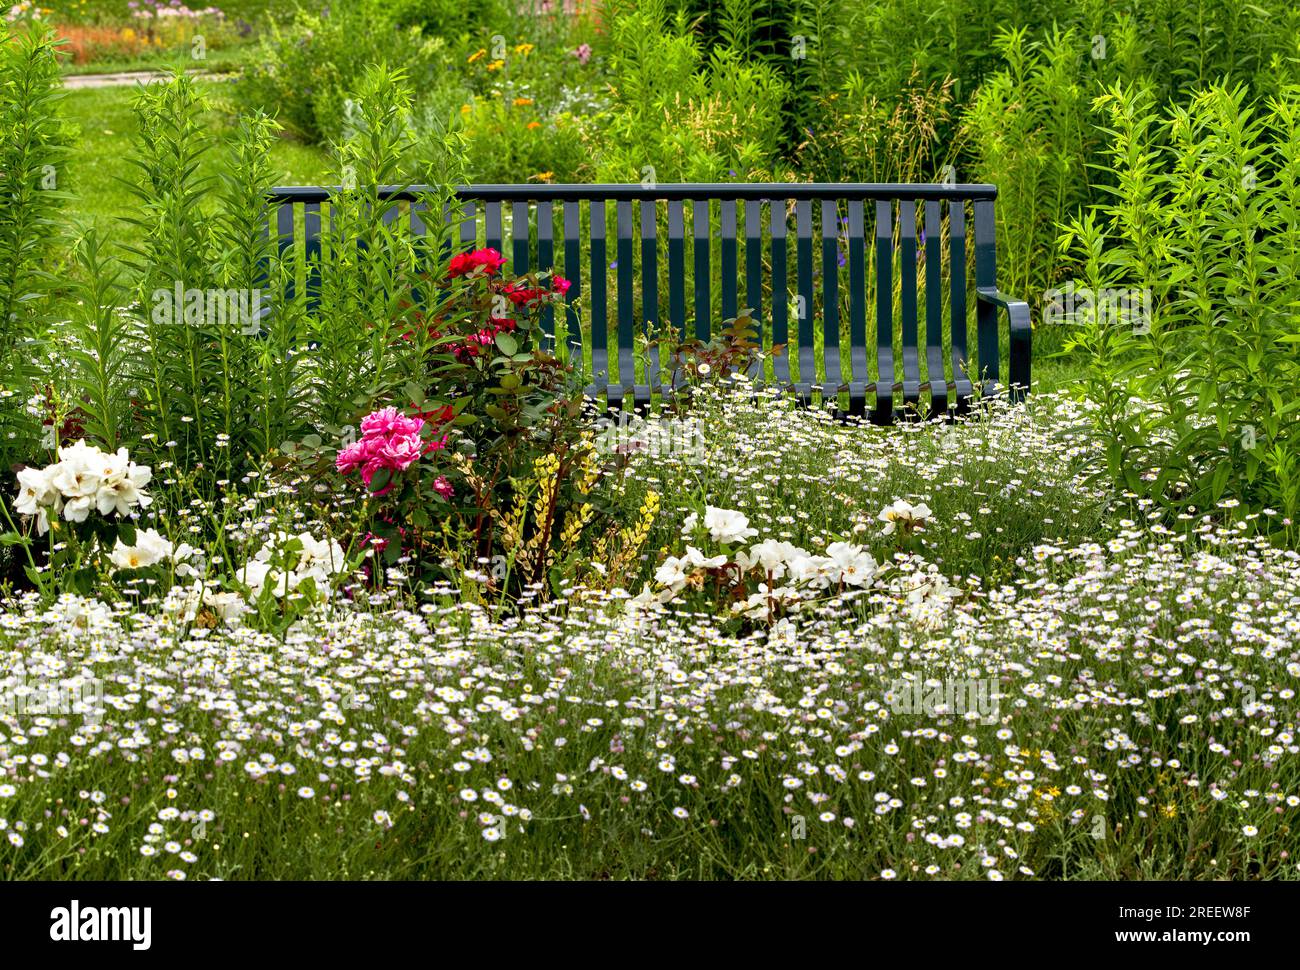 Delicate daisies and roses surround a park bench at Washington Park, in Denver, Colorado in the Summertime. Stock Photo